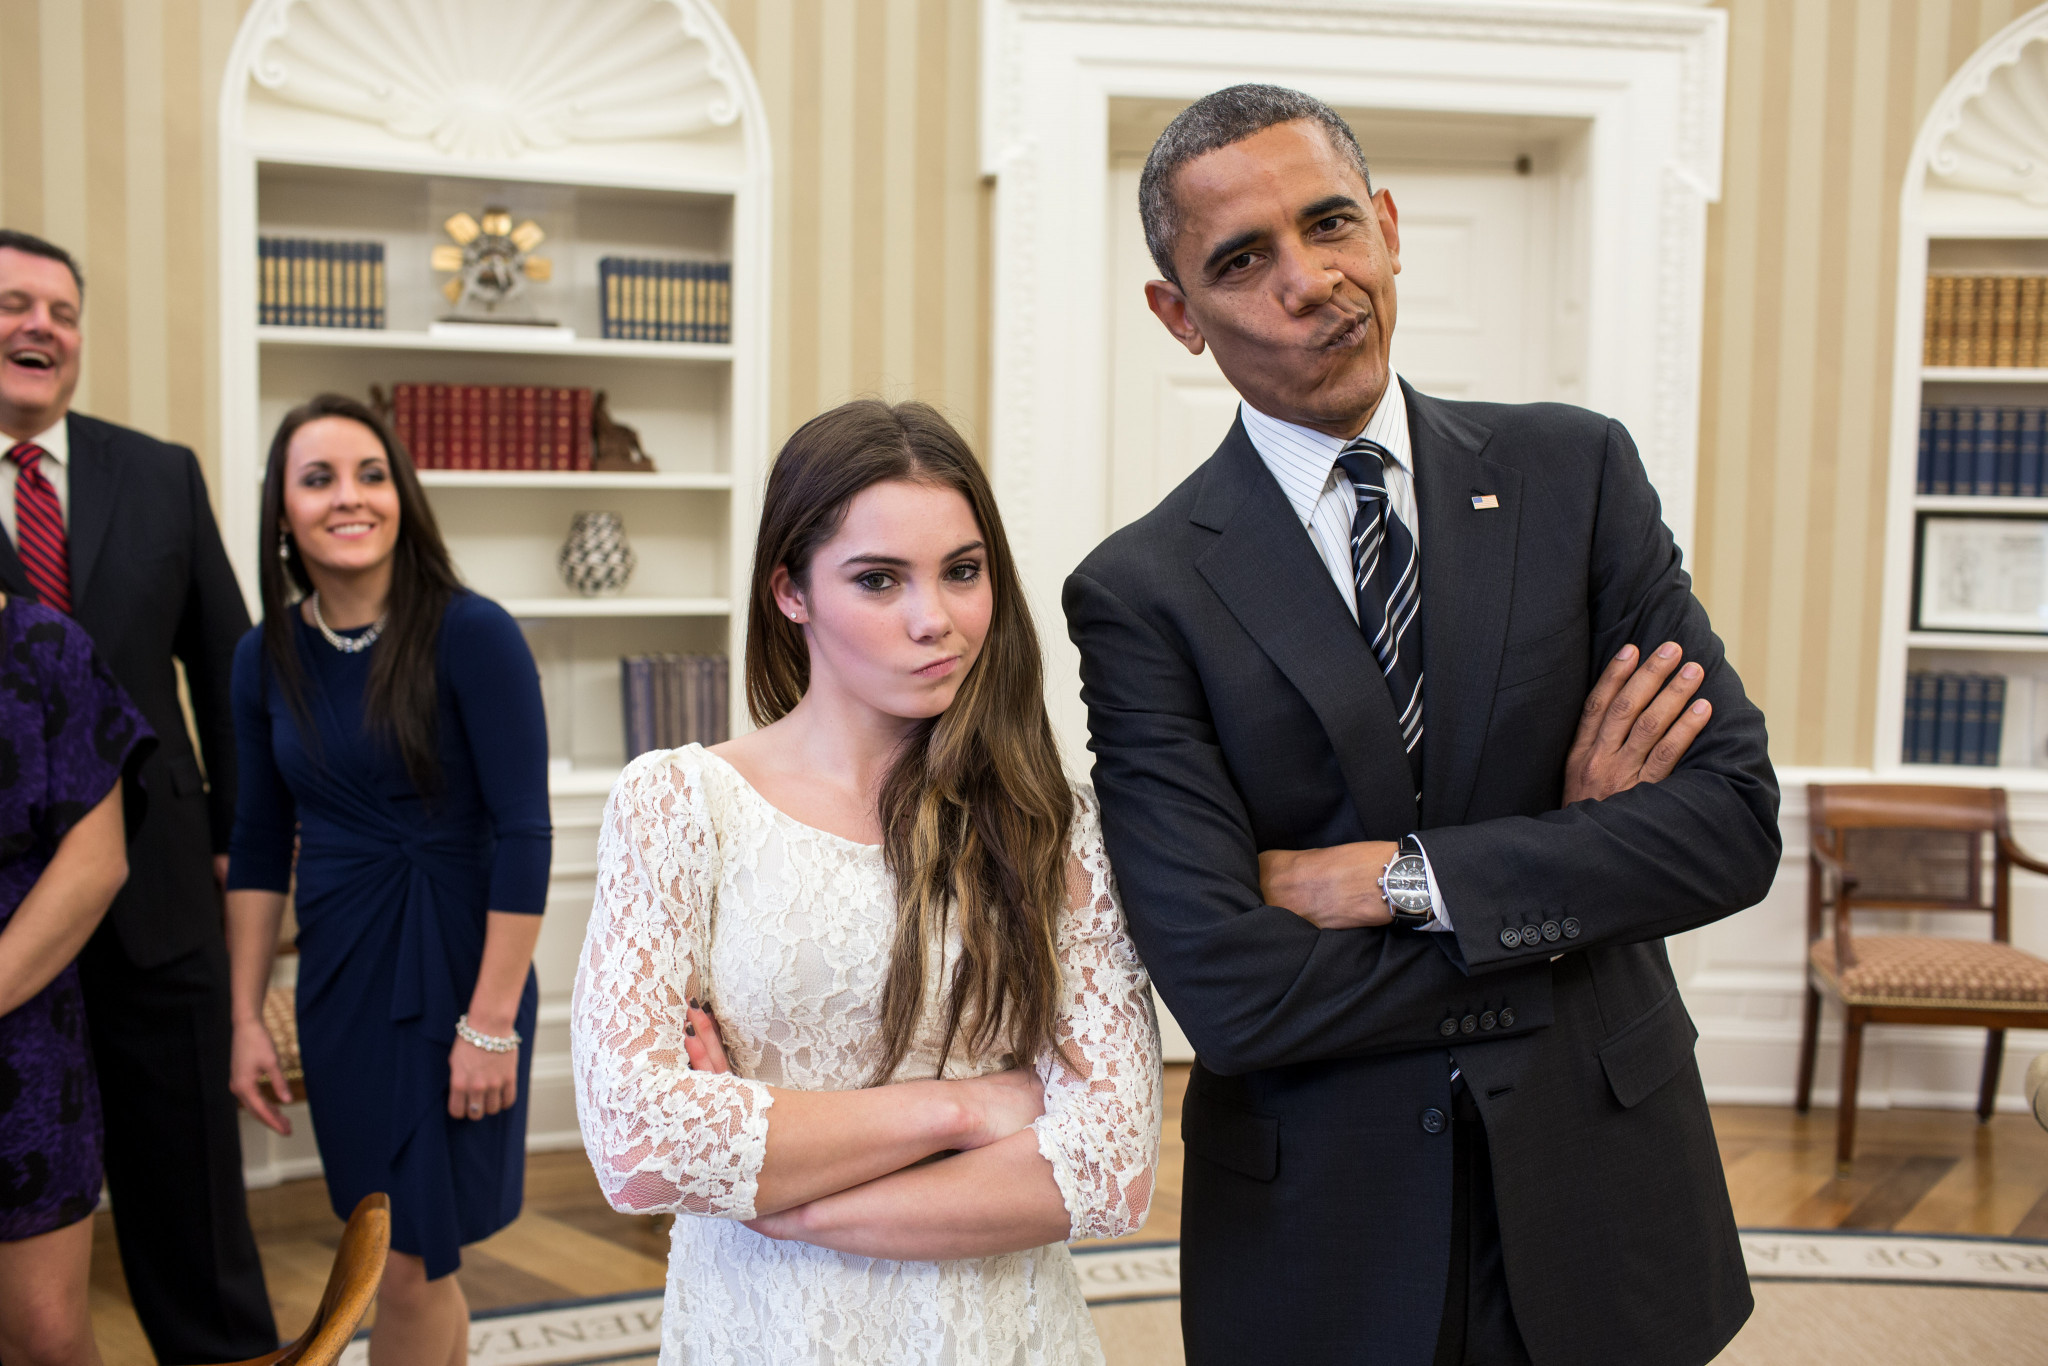 McKayla Maroney, seen here meeting former United States President Barack Obama in the White House, won Olympic team gold and individual vault silver medals at London 2012 ©Getty Images